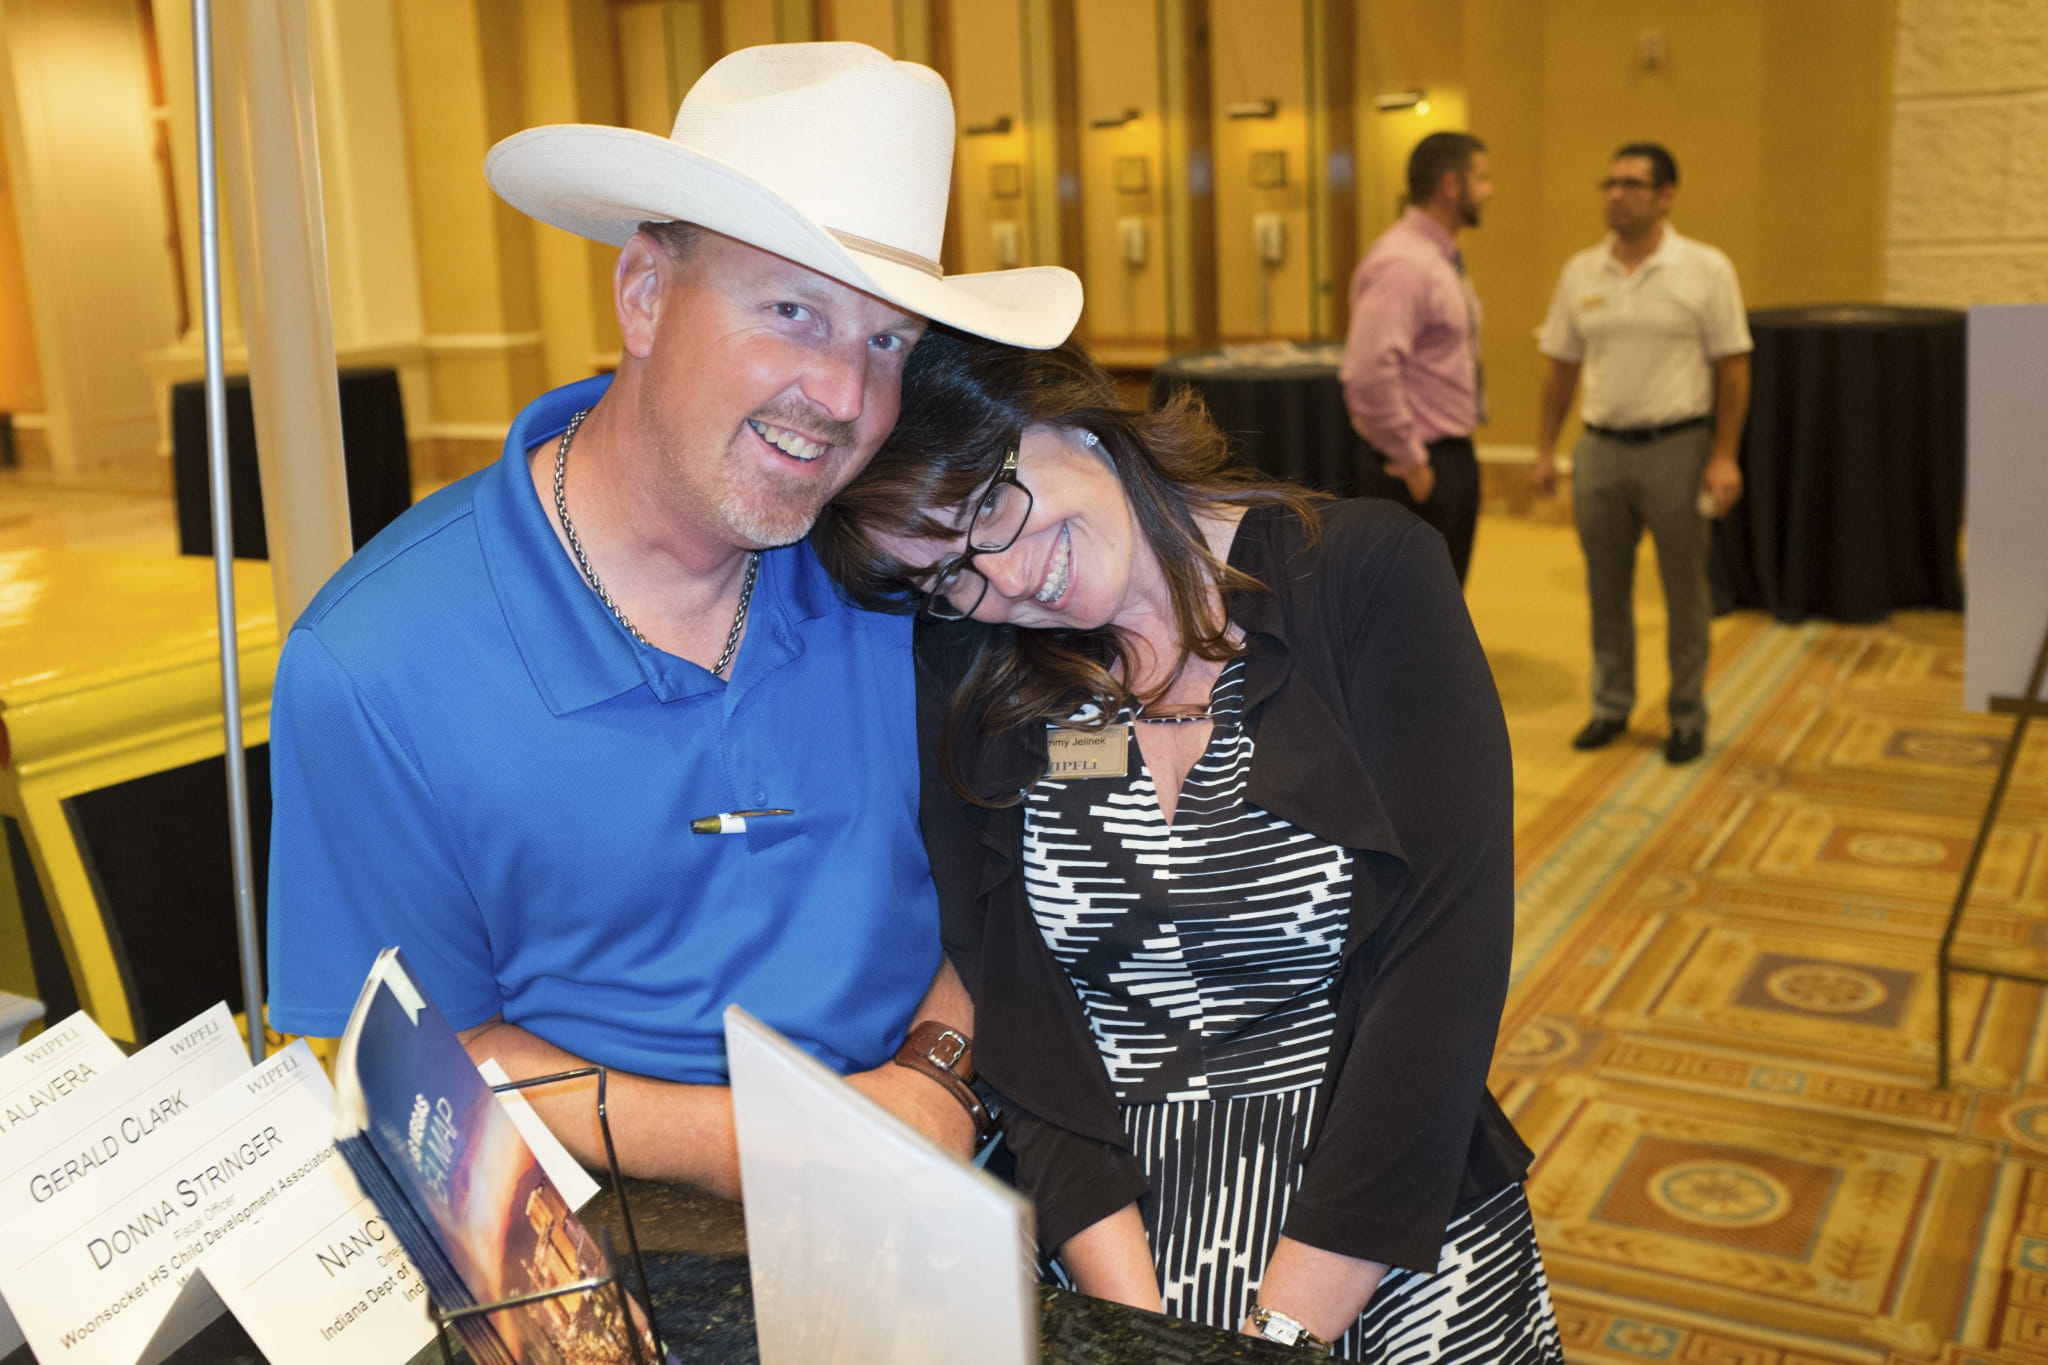 Tammy’s husband Jim loves to help out during the Wipfli national training conference in Las Vegas.